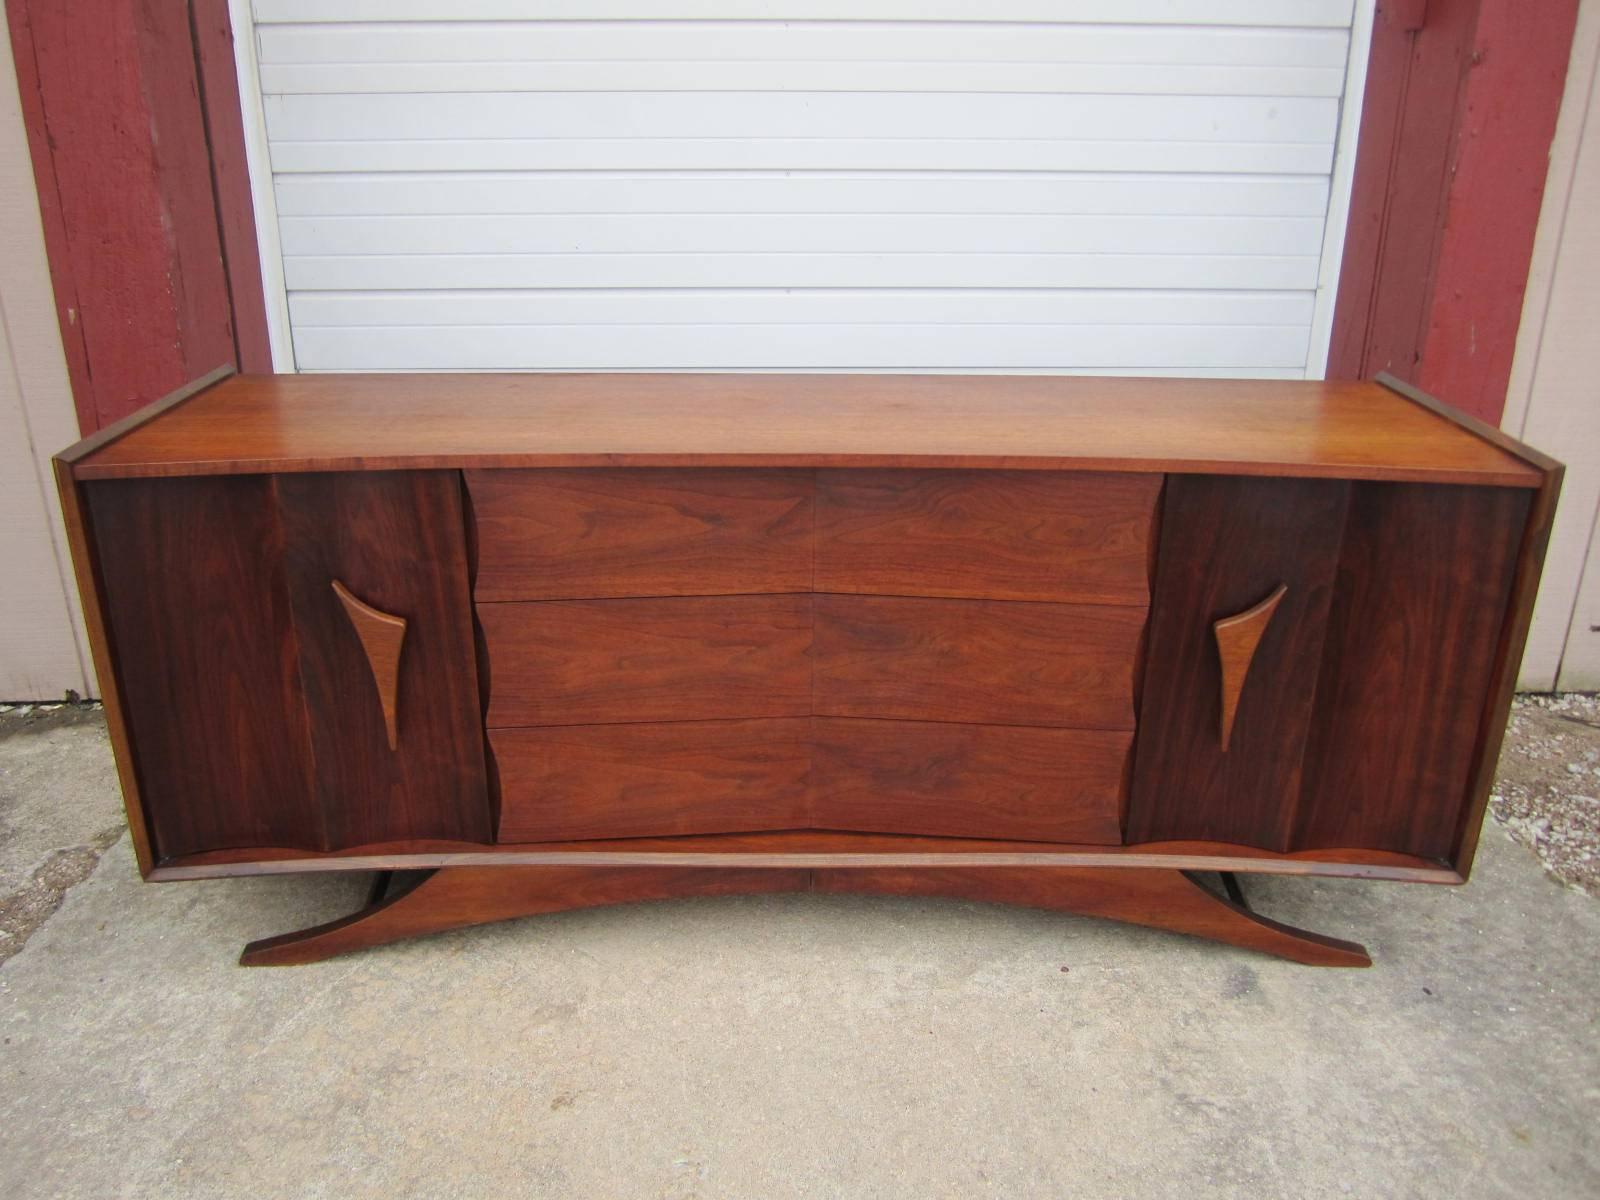 Fabulous bowed front sculptural walnut credenza. This gorgeous piece has beautifully carved double curved doors that open to reveal and nice bank of drawers on either side. Just look at the three large drawers in the middle how neat they are